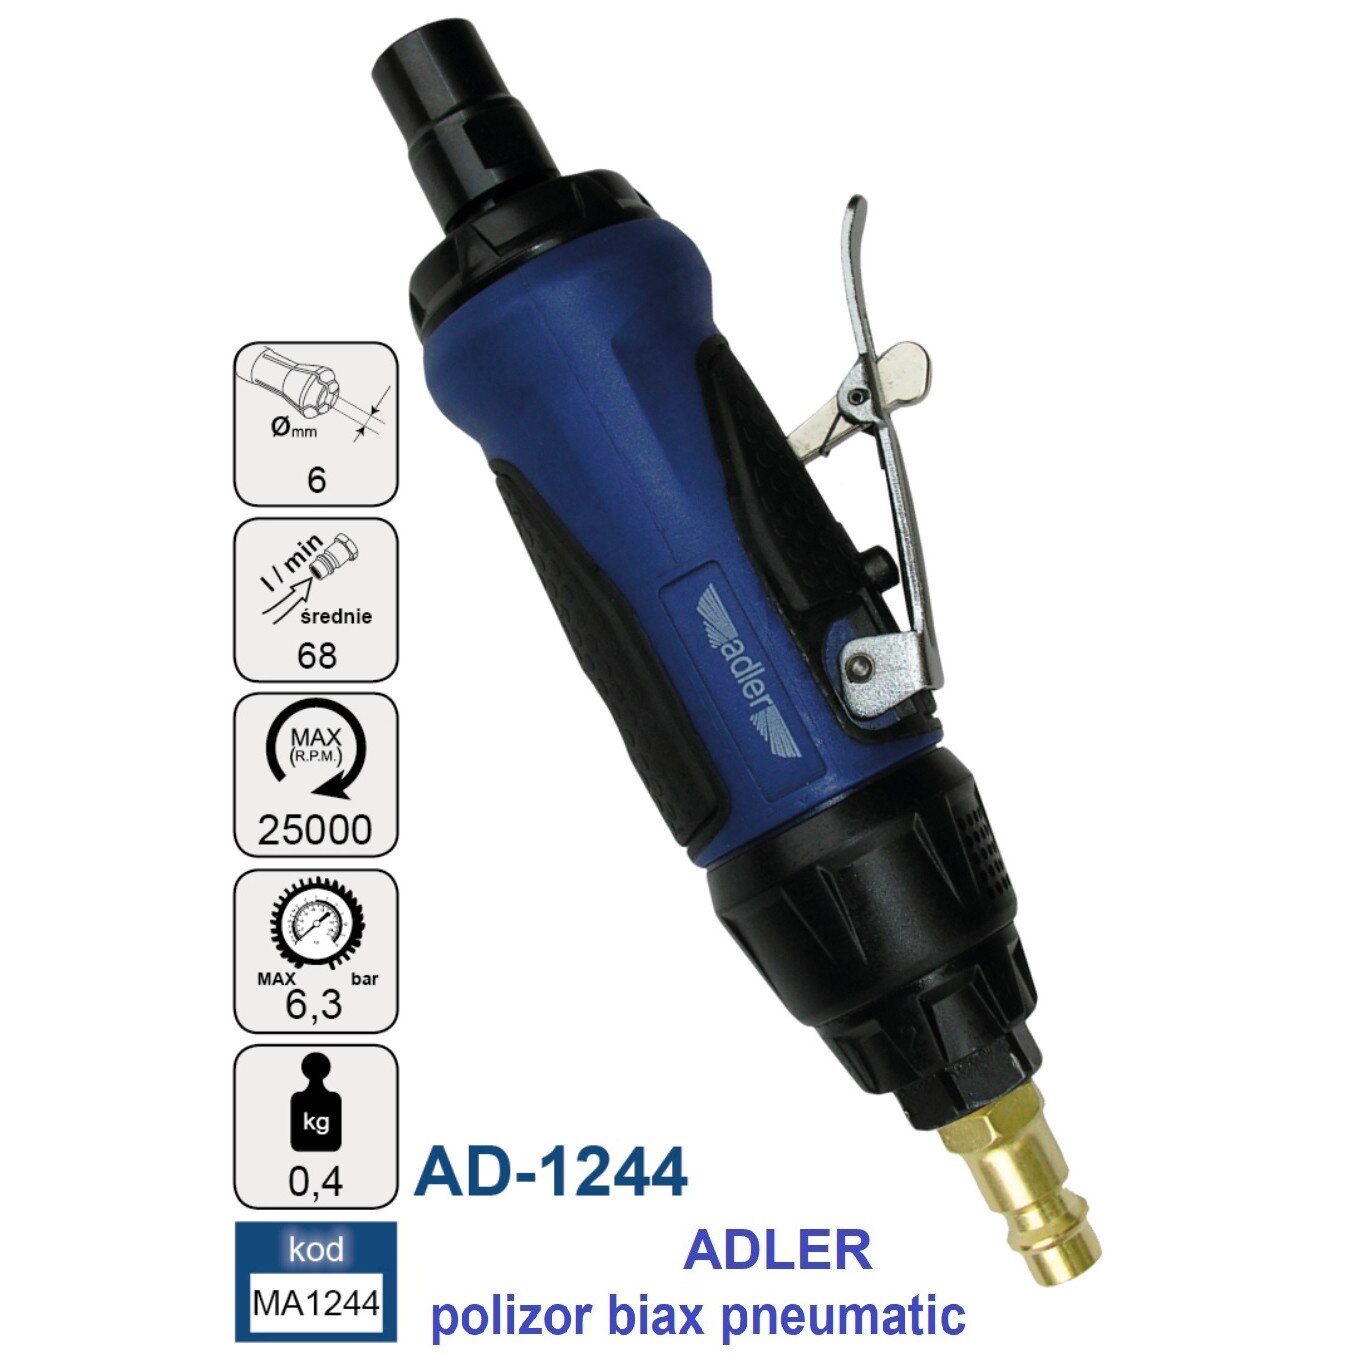 practice wherever Opponent Polizor biax pneumatic ADLER AD-1244 6 mm PROFESIONAL - eMAG.ro